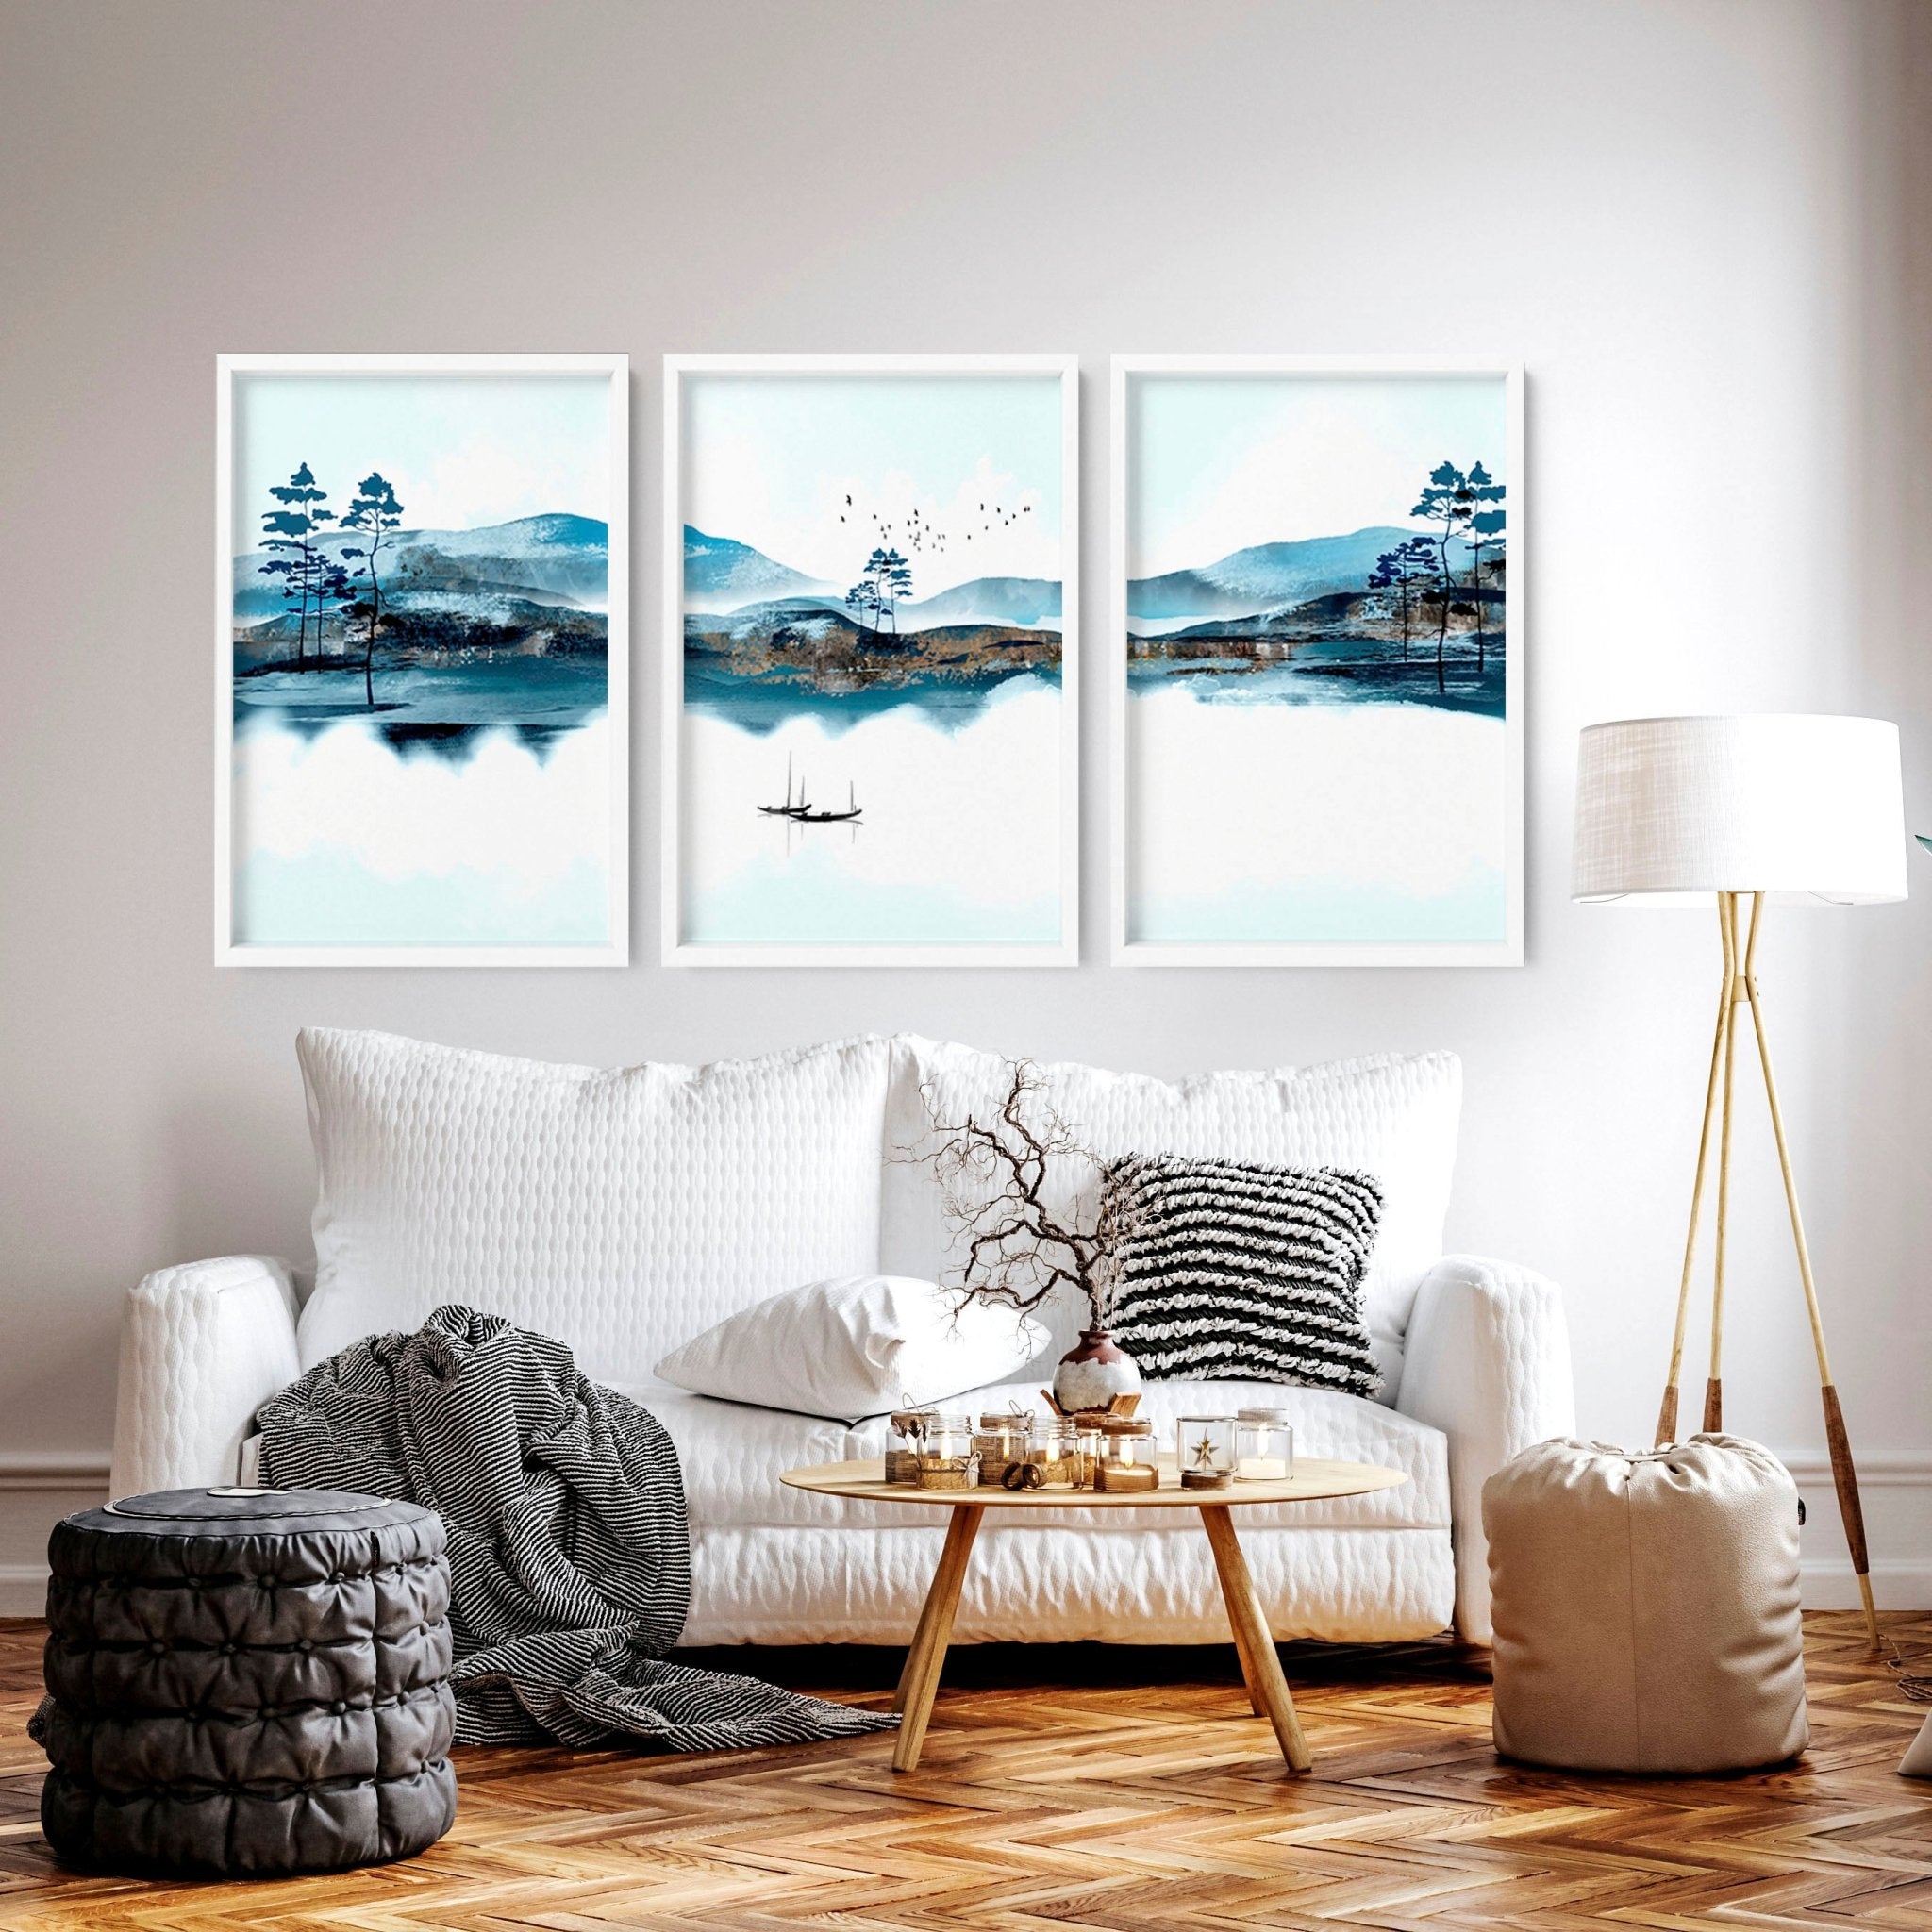 Teal wall art for living room | set of 3 wall art prints - About Wall Art